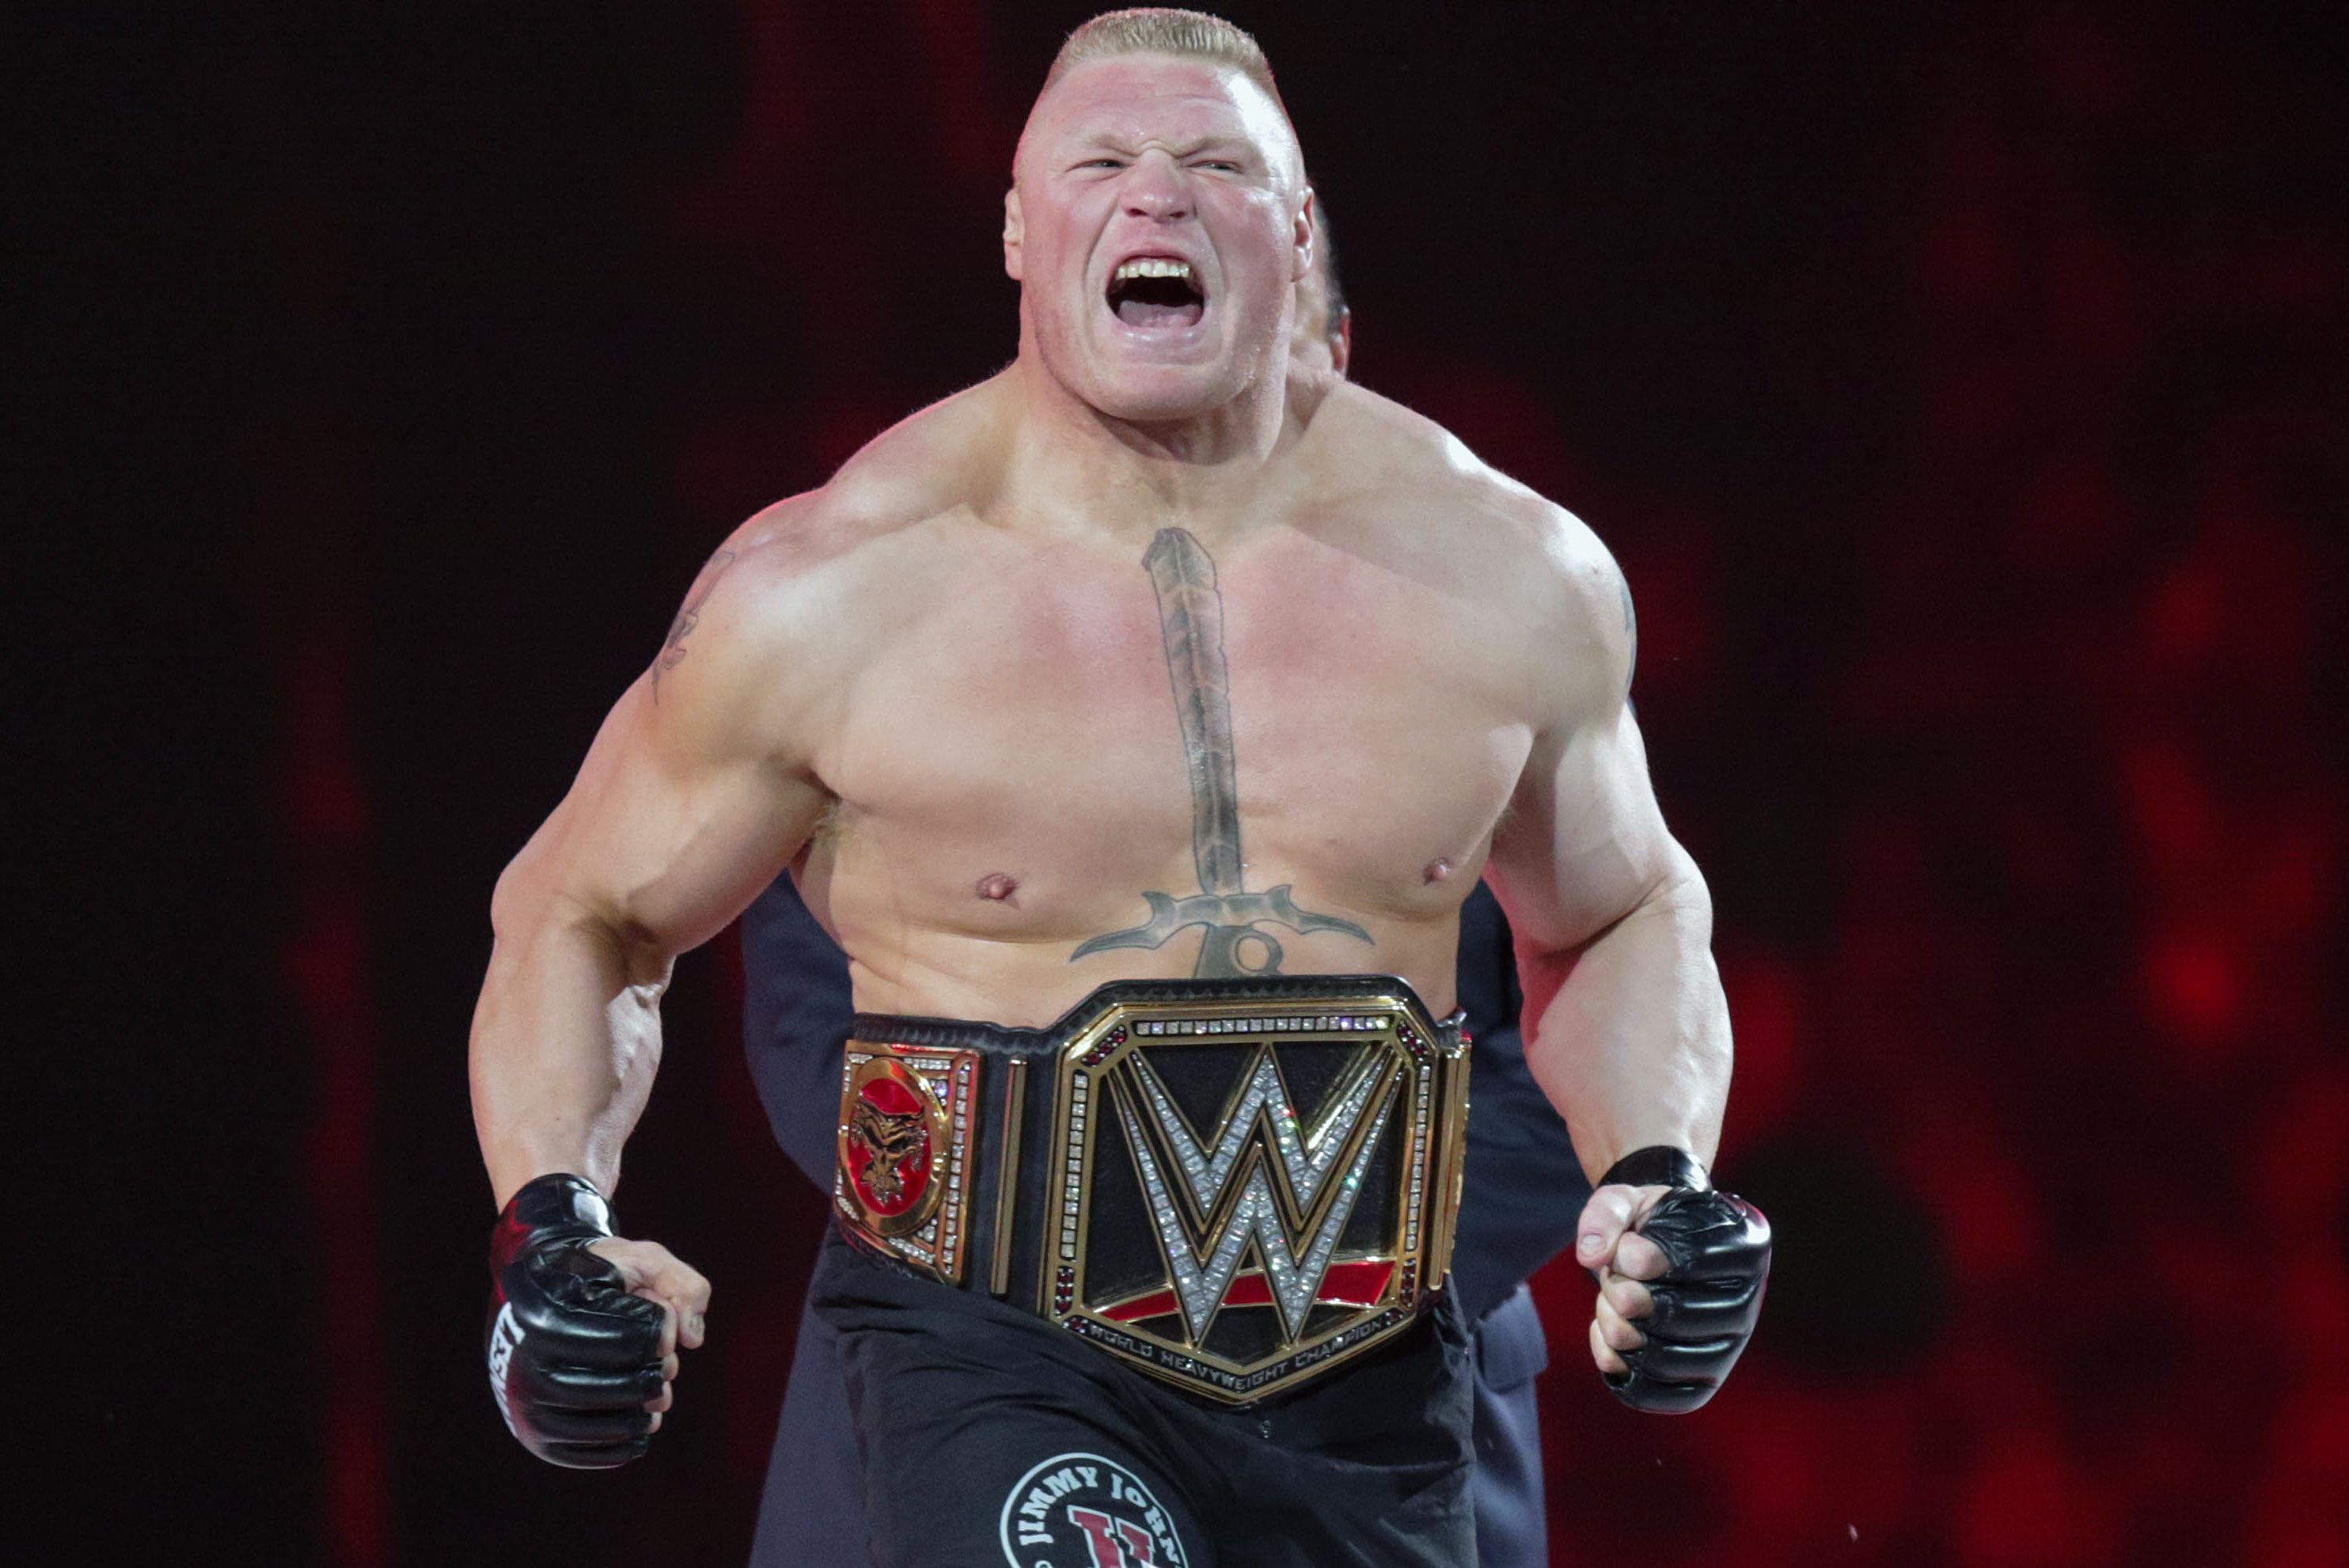 WWE Rumors: Brock Lesnar Not Mentioned on Raw to Keep Focus